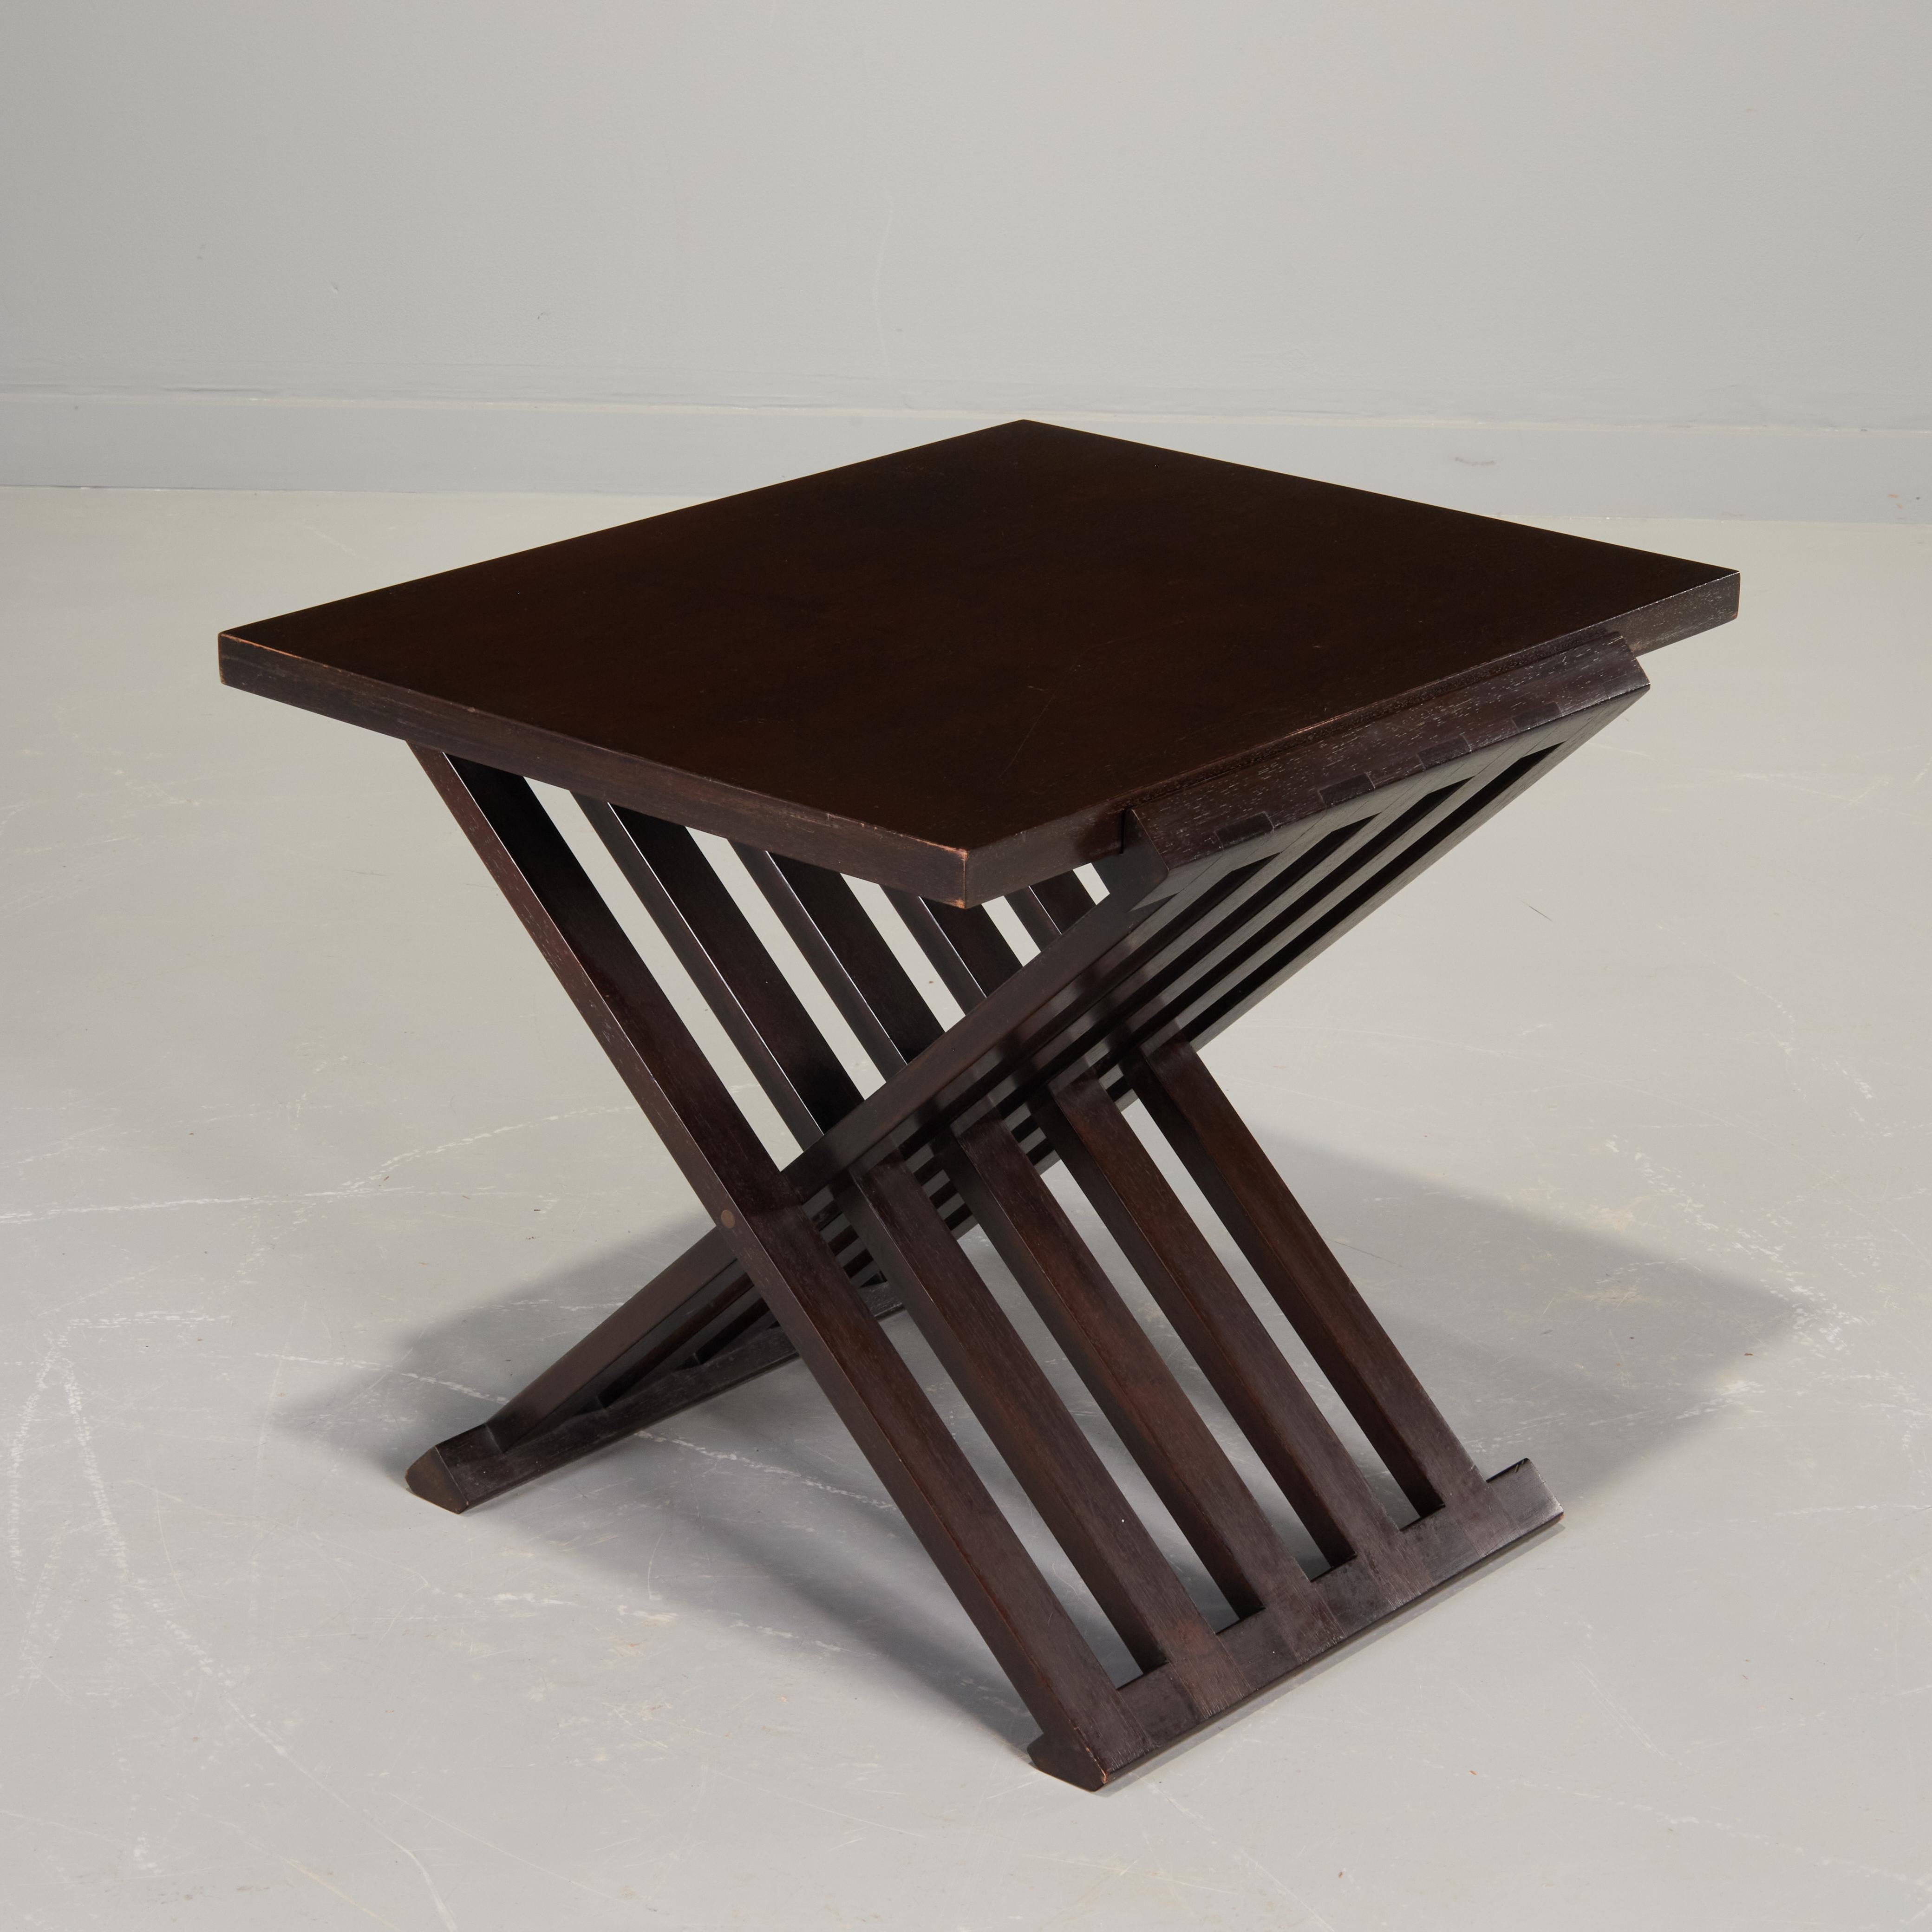 Occasional table by Edward Wormley for Dunbar, model 5425. Rosewood and Walnut  folding x-base with removable mahogany tray top. Labeled with Dunbar gold metal tag